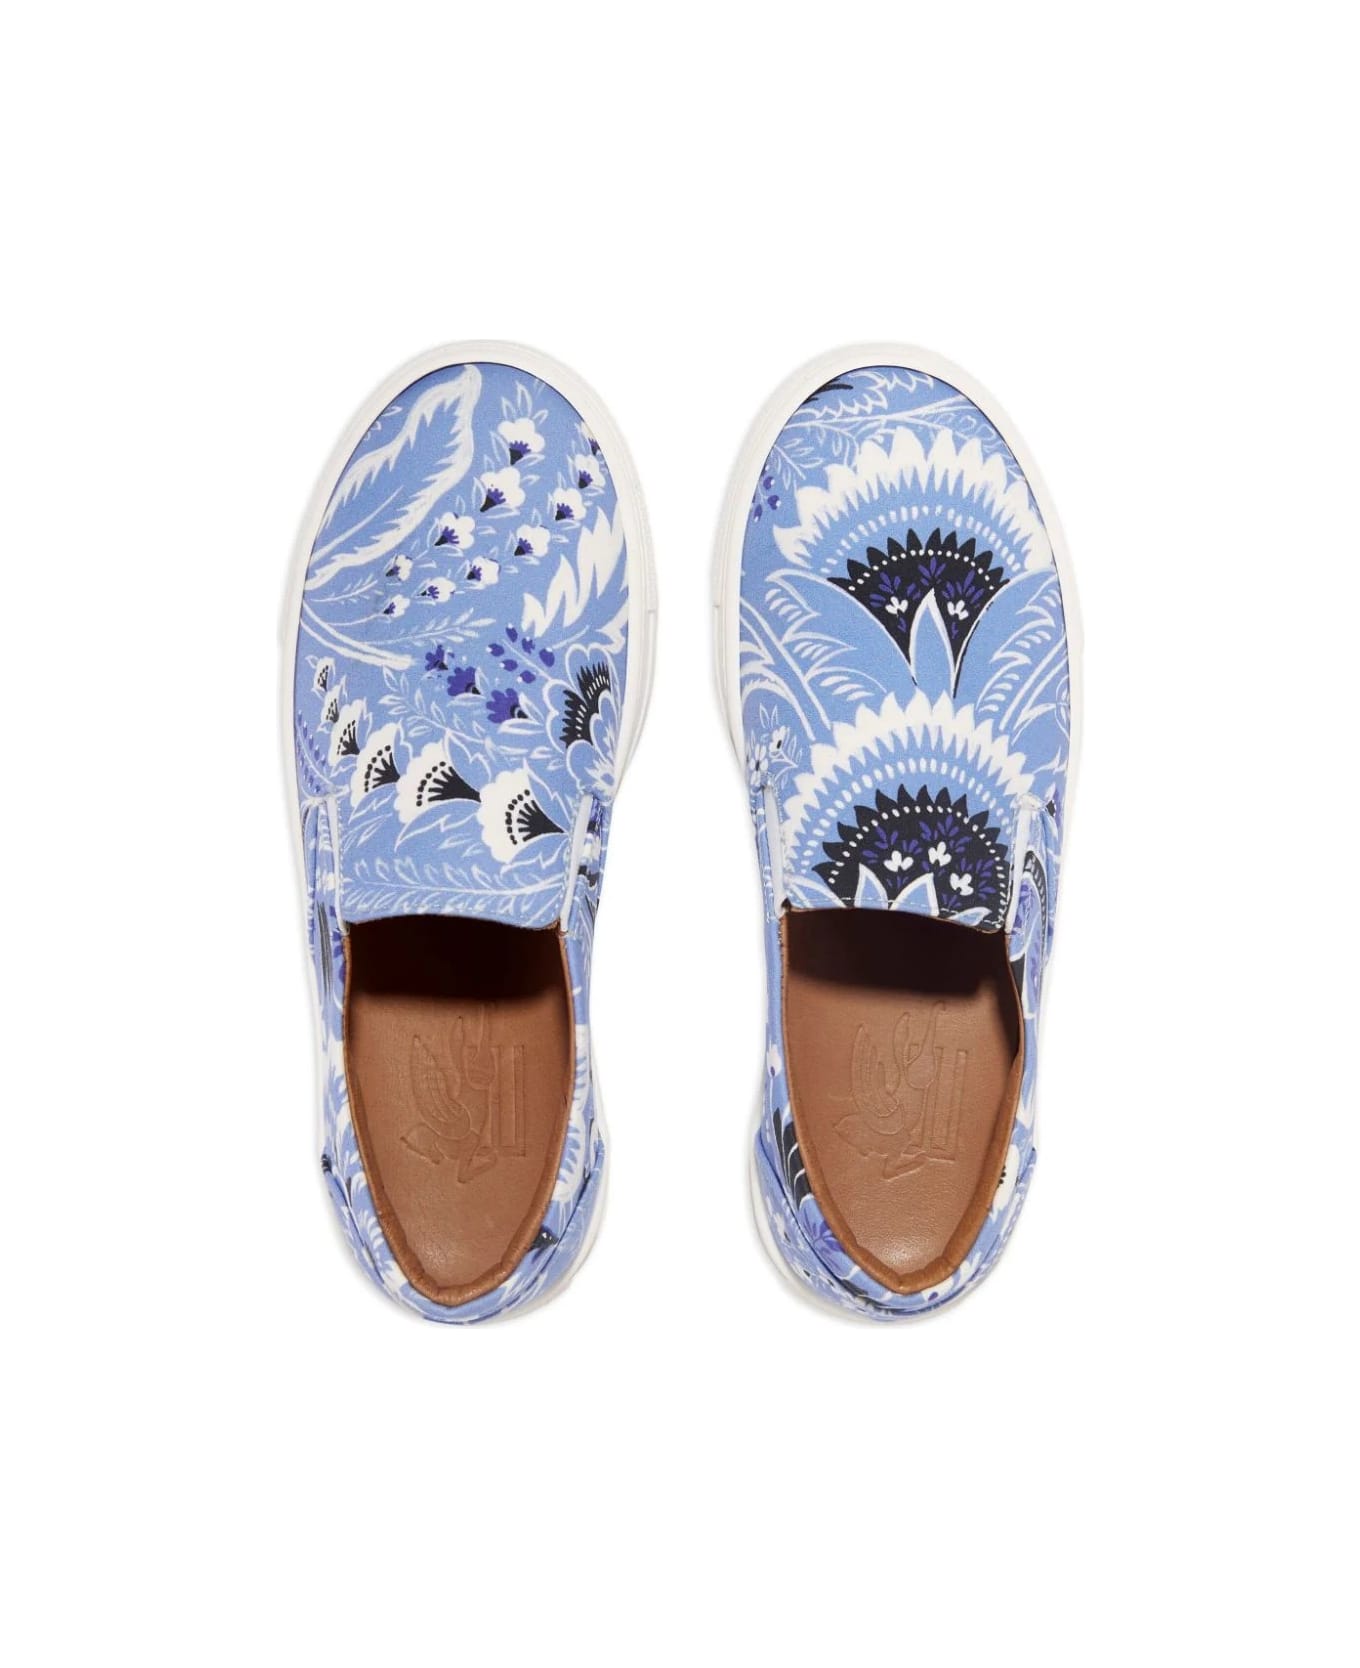 Etro Sneakers With Light Blue Paisley Print - Blue